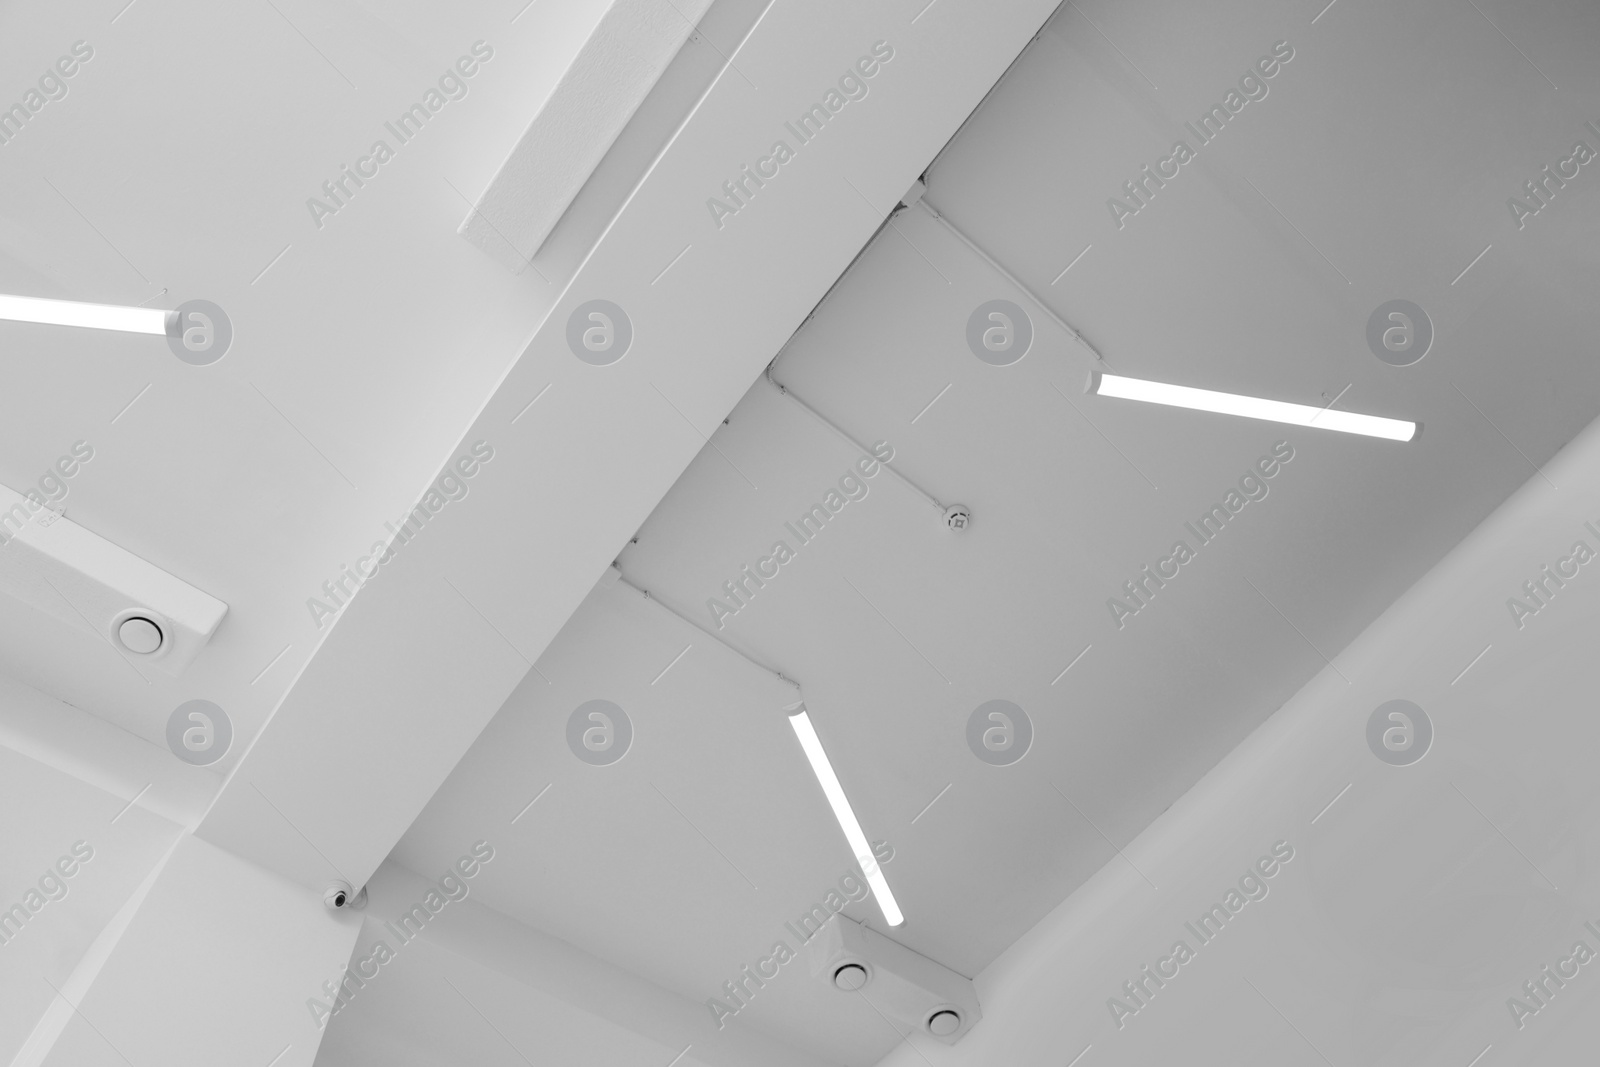 Photo of Ceiling with modern lights in room, low angle view